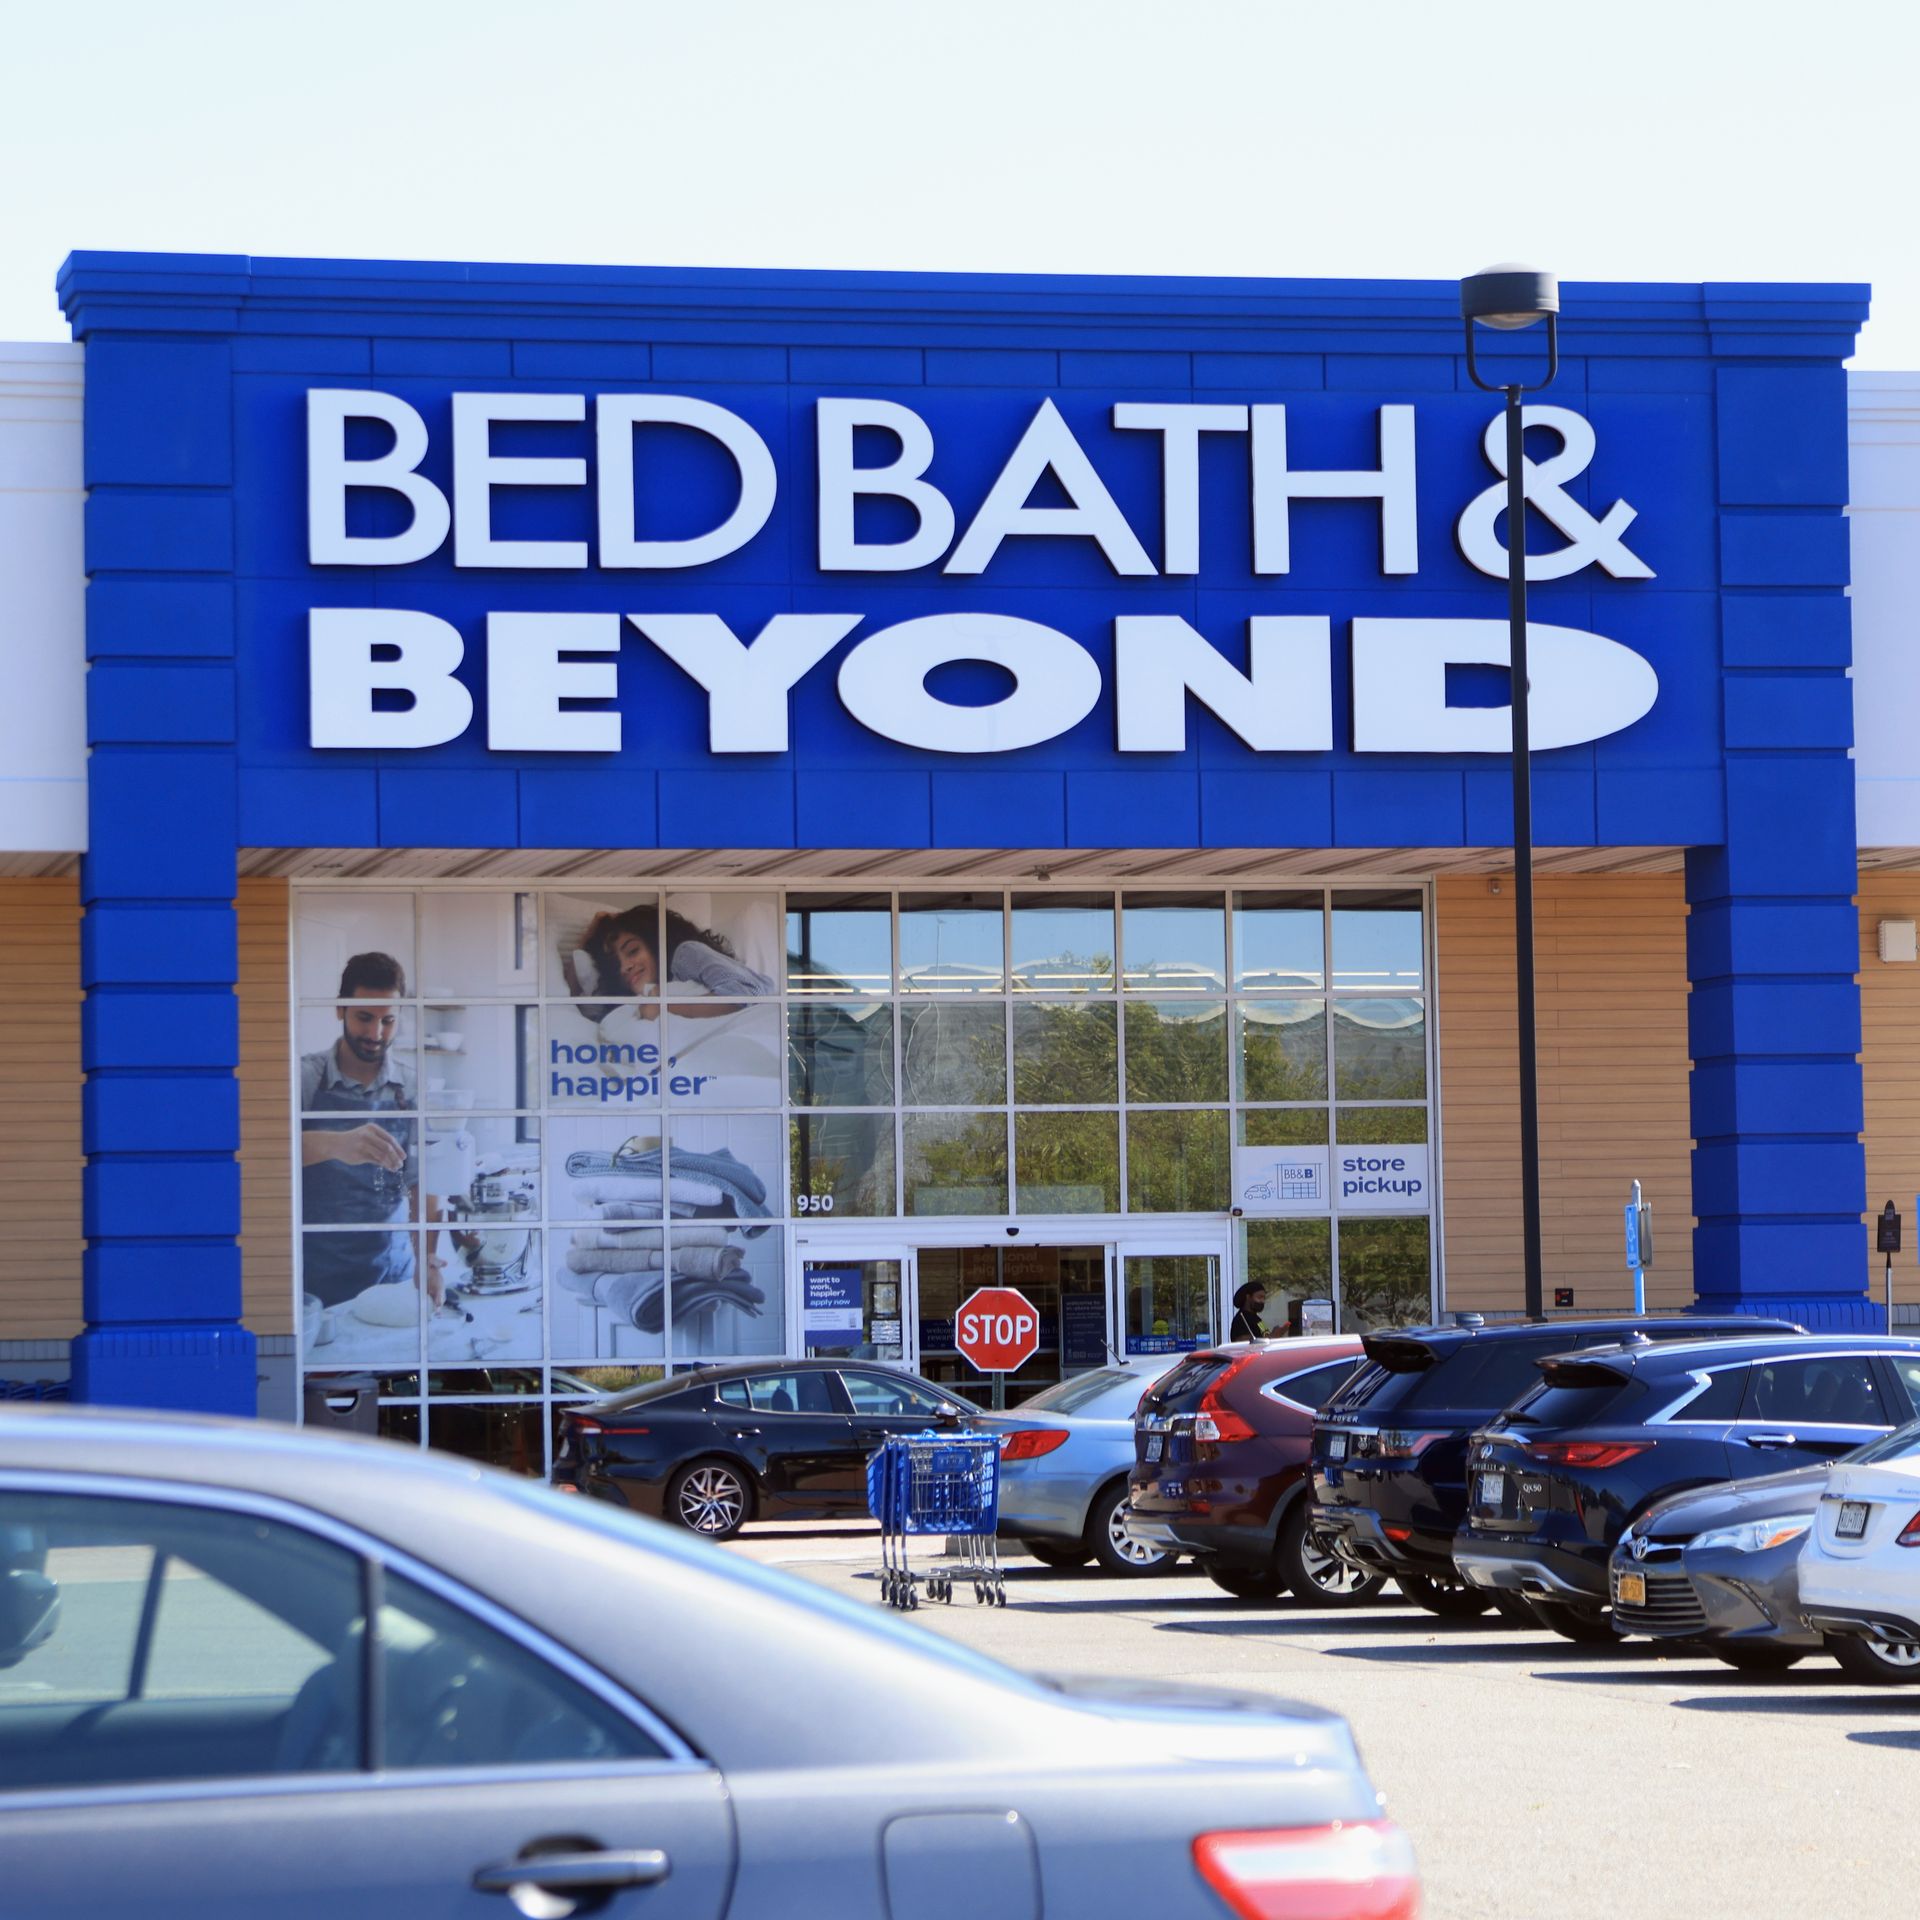 A Bed Bath & Beyond store front, in blue and white, with a parking lot filled with cars.